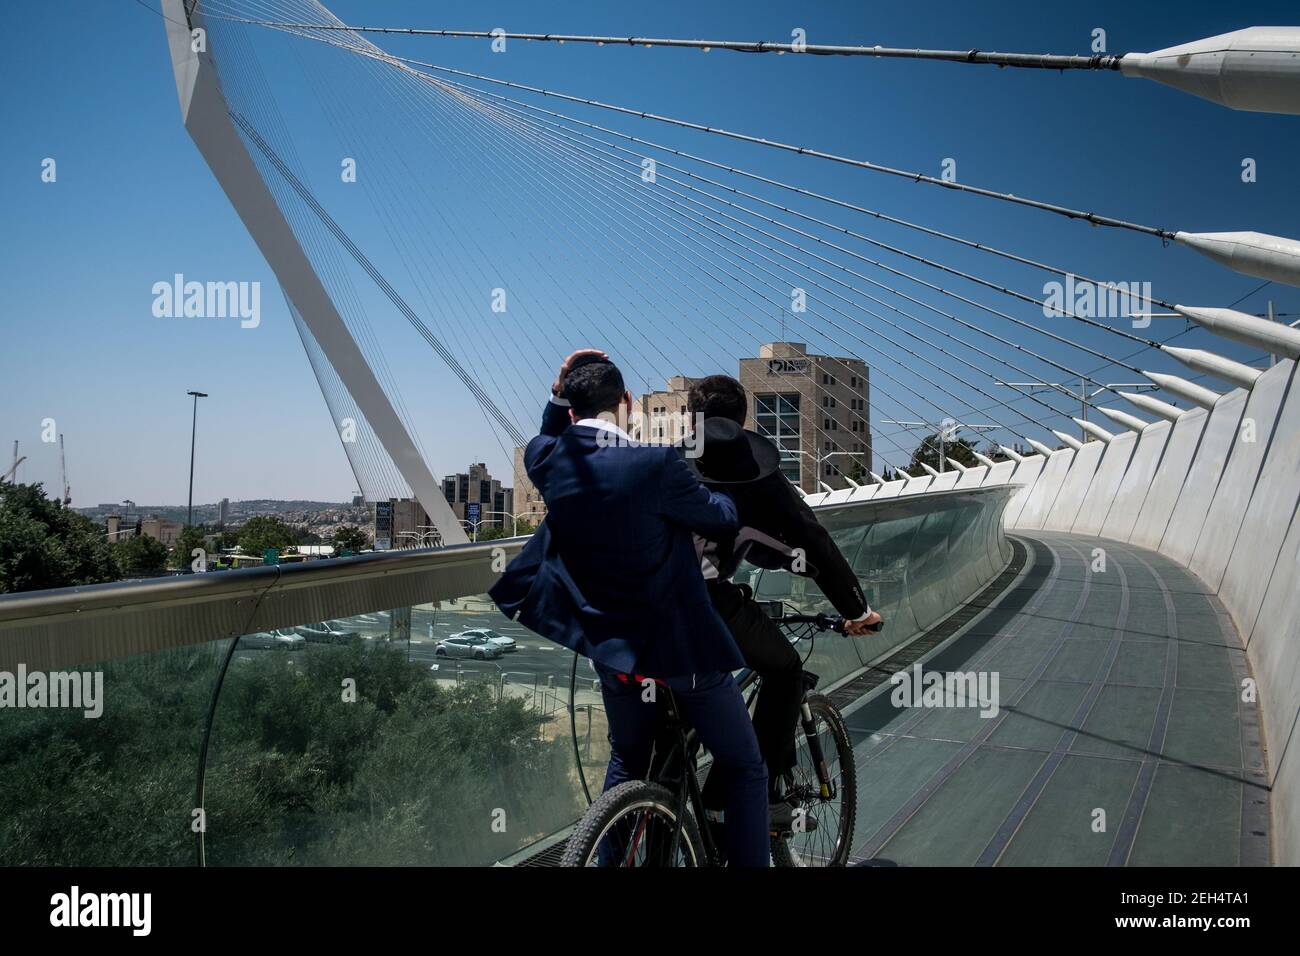 Two Jews ride their bikes over the Cordes Bridge. This one is now part of the Jerusalemite landscape. With its steel cables connecting the structure to a sort of mast, the futuristic work of Spanish architect Santiago Calatrava allows the tramway to cross a busy intersection in Jerusalem, on the road leading to Tel Aviv. A footbridge with glass railing adjacent to the tramway has been provided for pedestrians. May 17, 2018. Jerusalem. Israel. Stock Photo